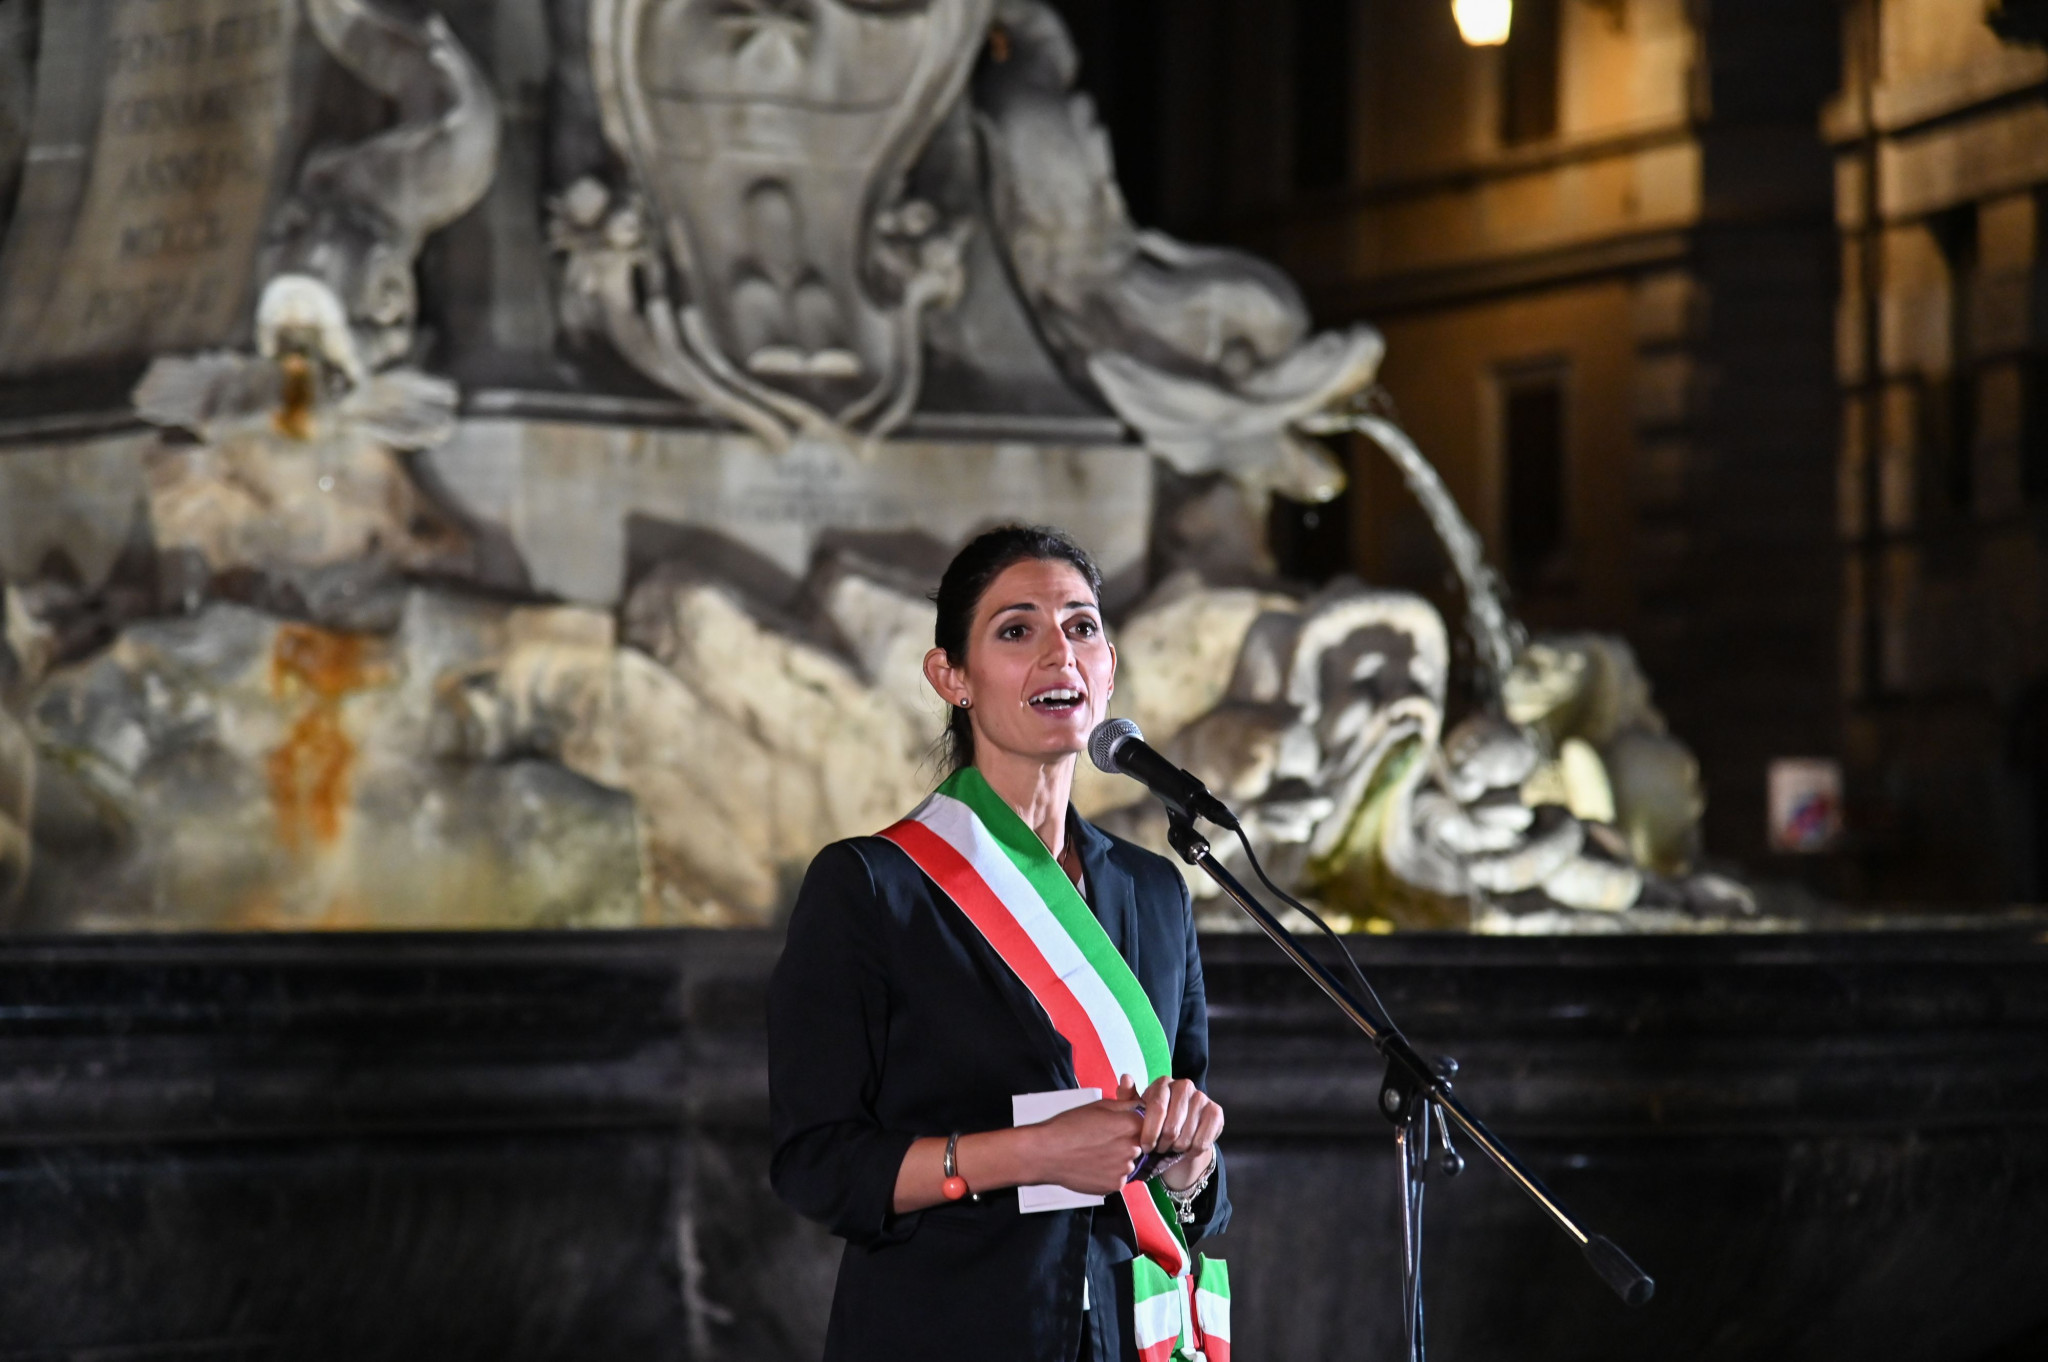 Rome Mayor Virginia Raggi used a previous Saïd Business School study in her reasoning to withdraw the city's bid for the 2024 Olympics ©Getty Images